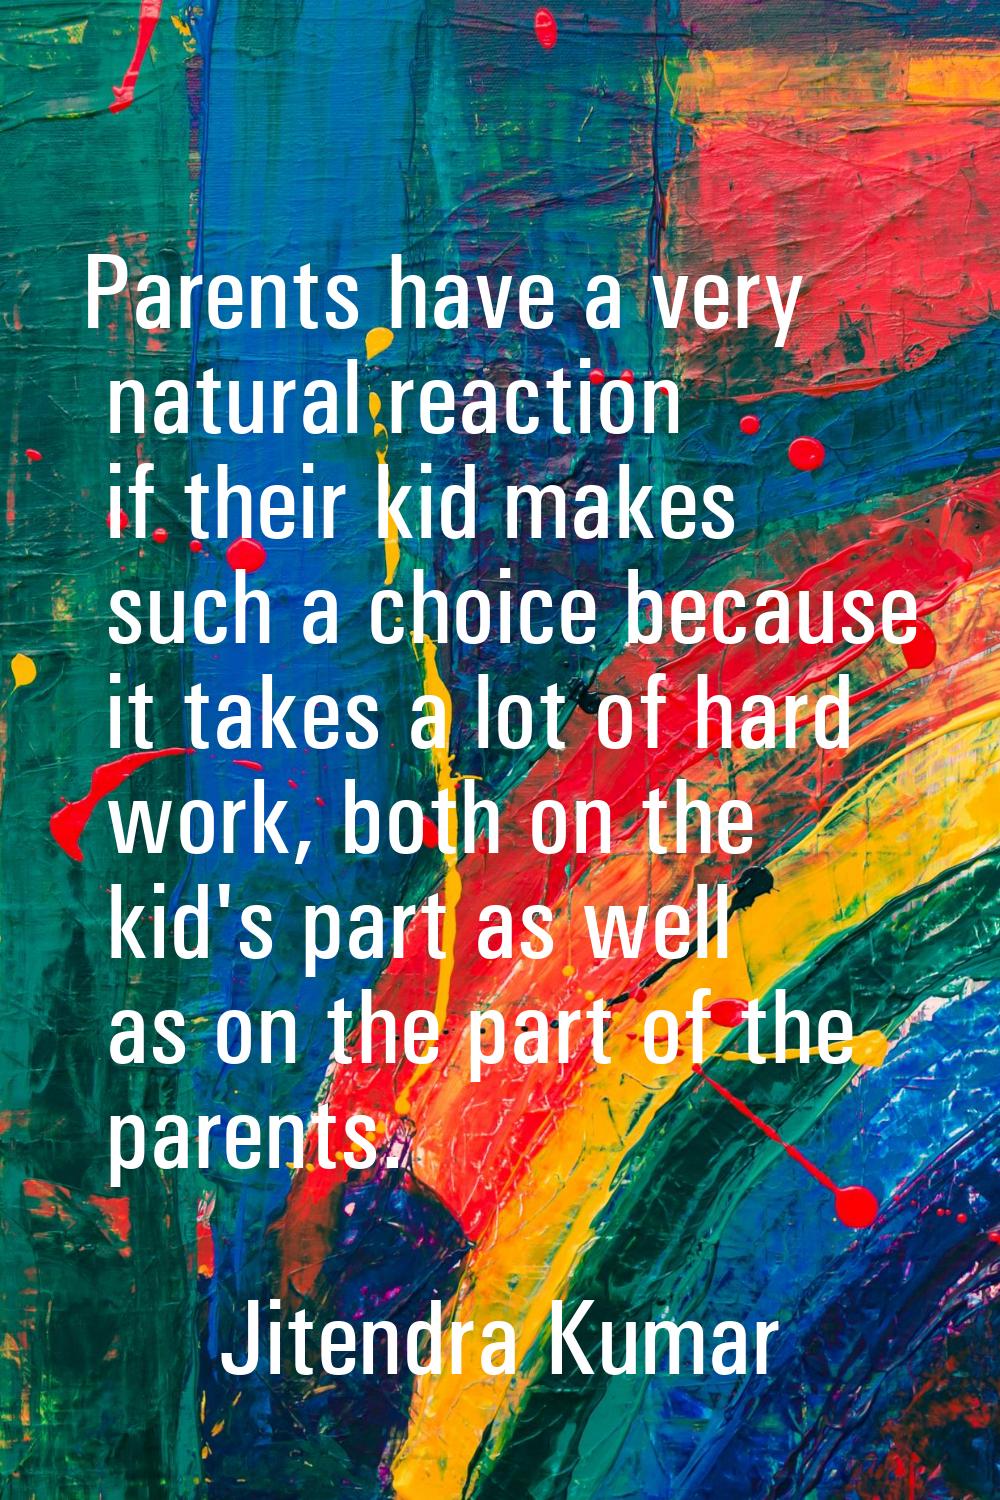 Parents have a very natural reaction if their kid makes such a choice because it takes a lot of har